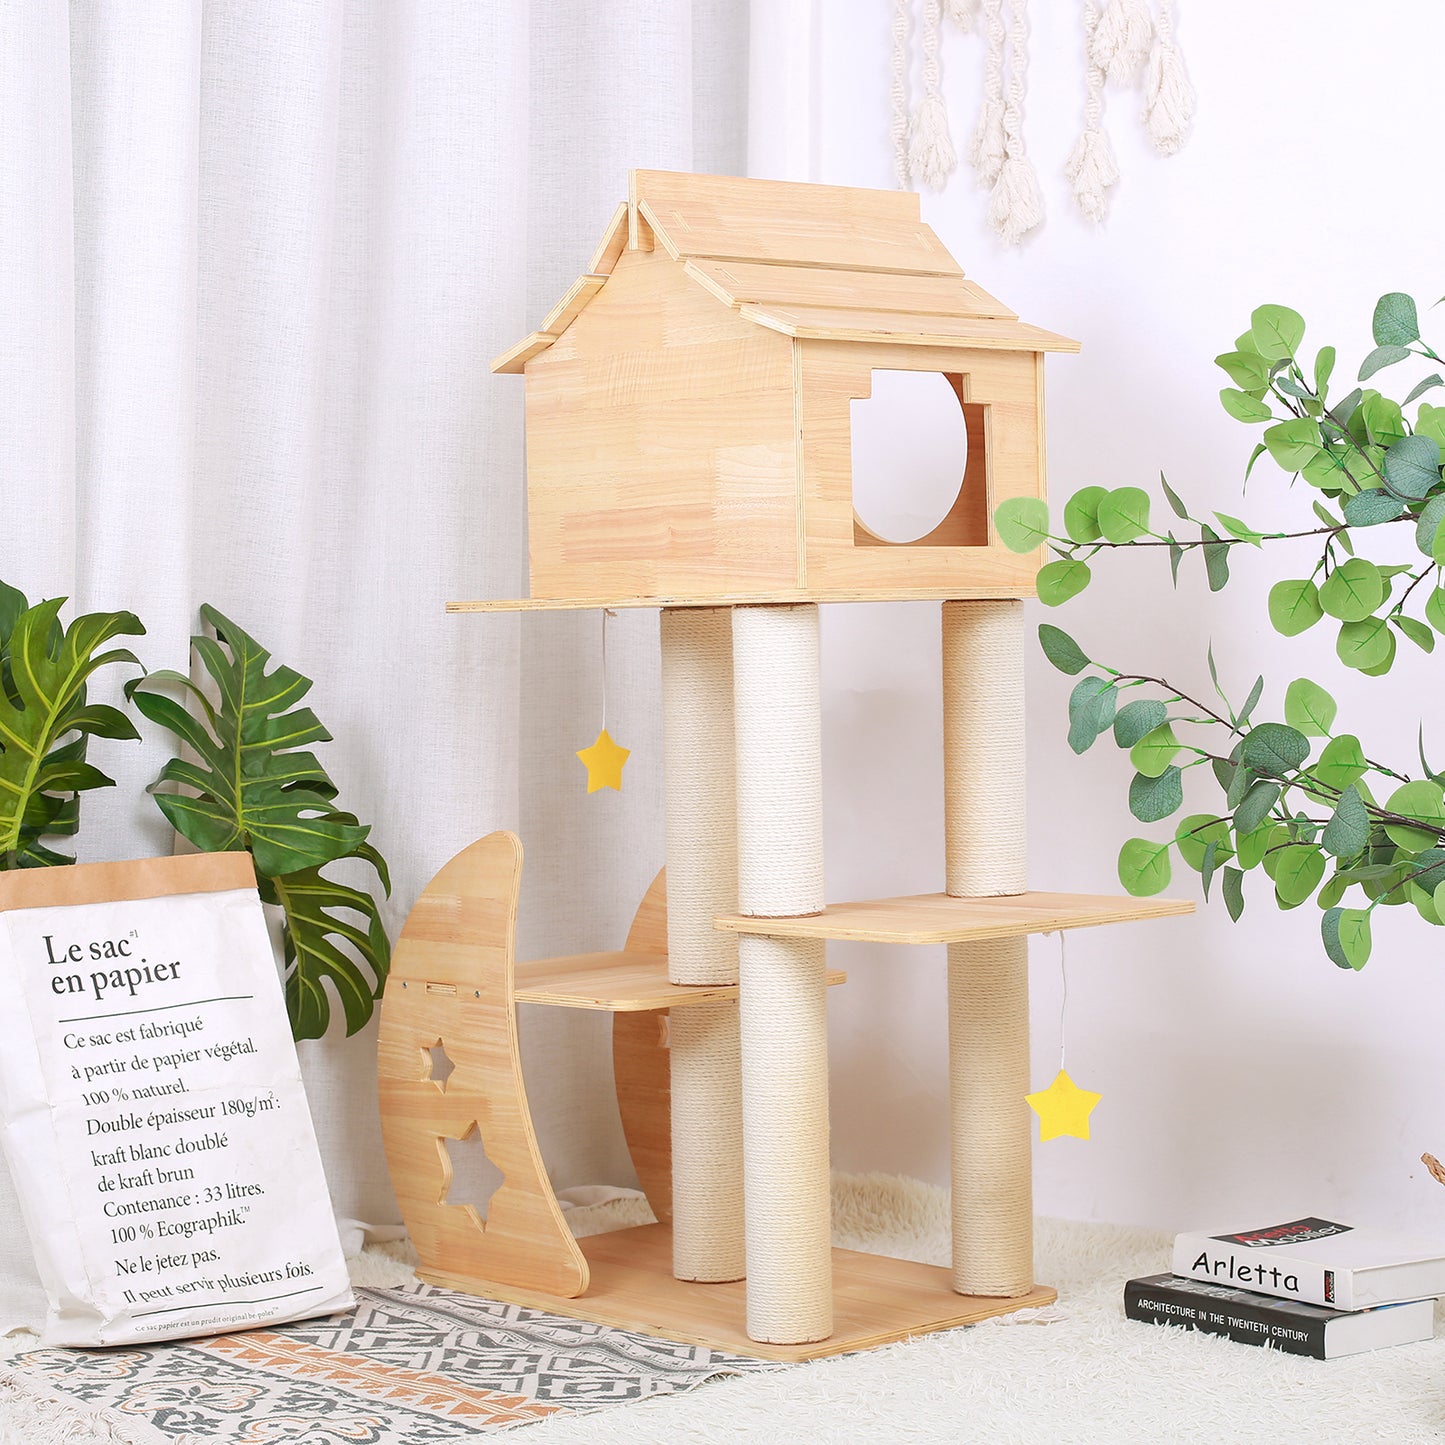 Algherohein Wooden Cat Trees and Towers with Space Capsule,Home Cat Scratching,Pet Cat Gifts